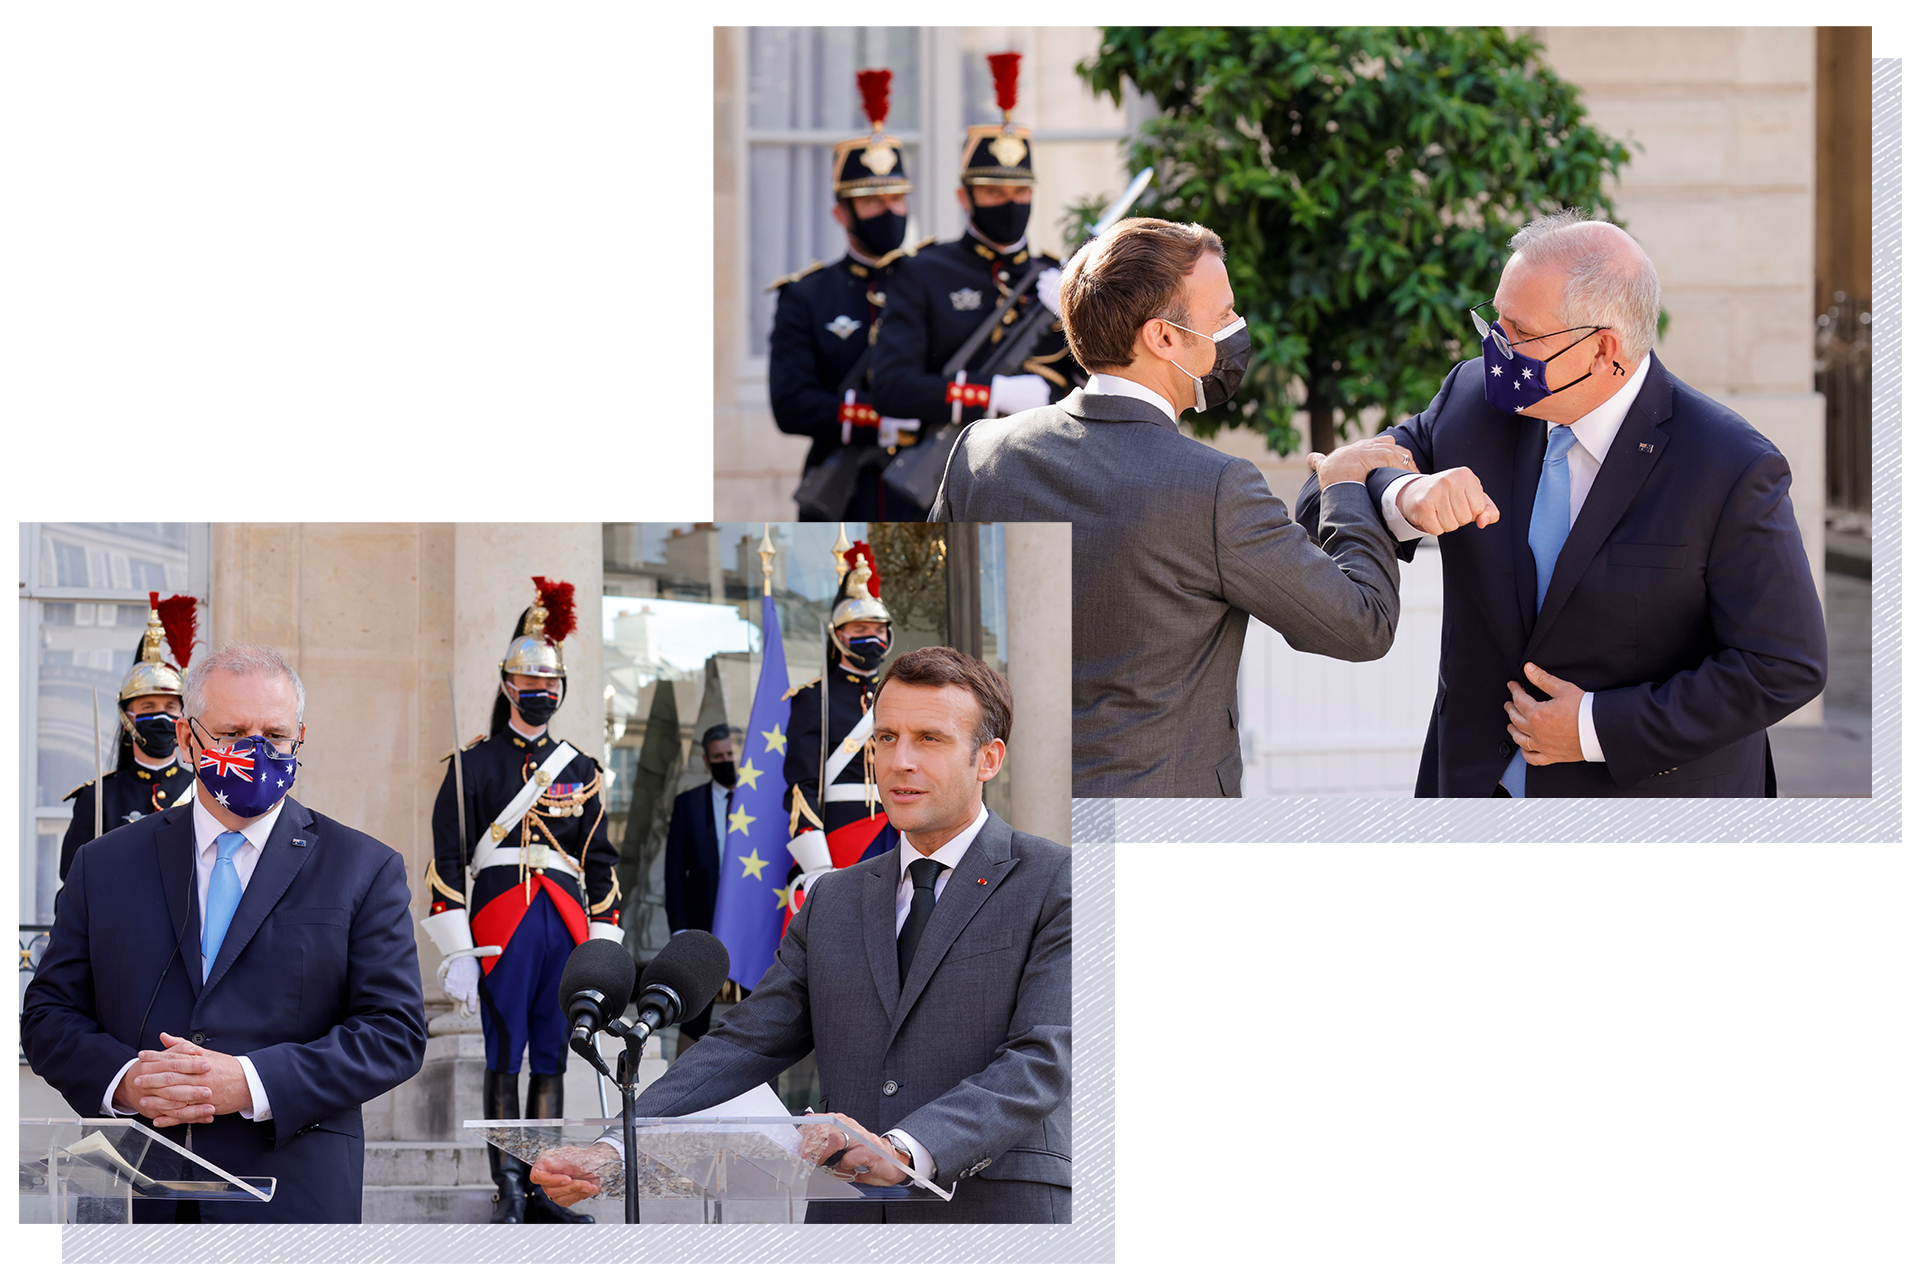 A composite picture of Macron greeting Morrison.